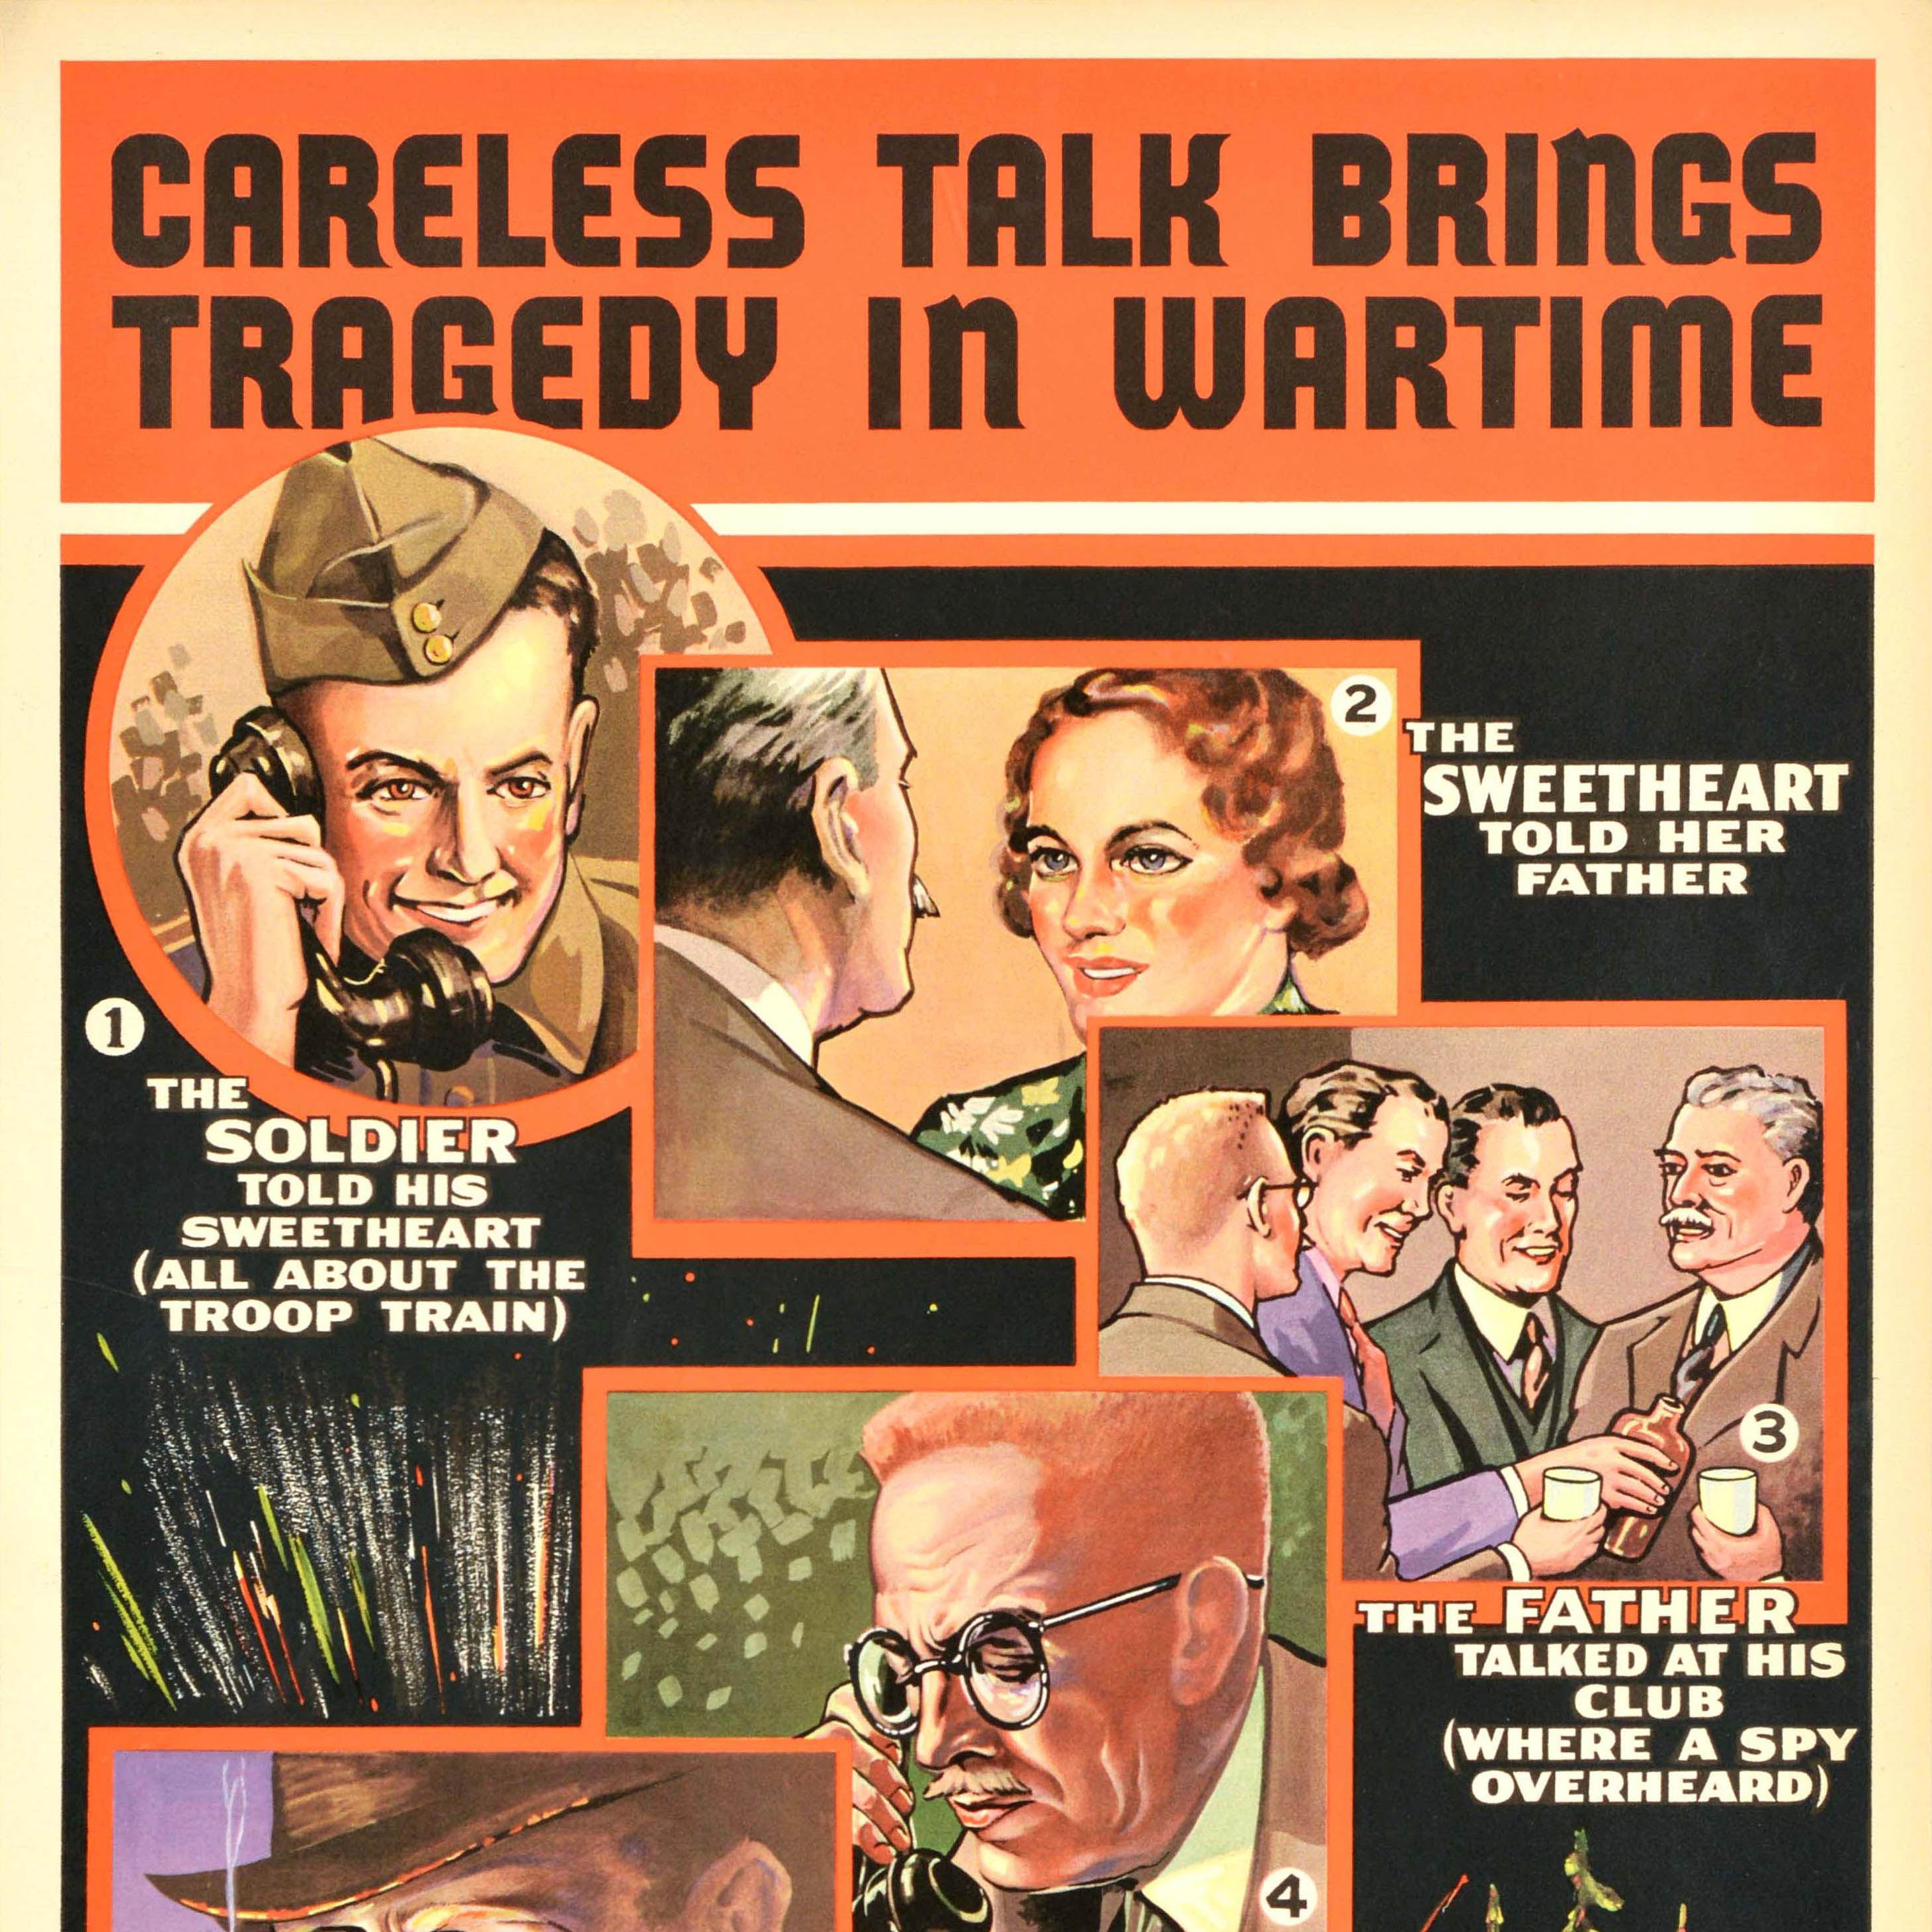 Original vintage World War Two warning propaganda poster - Careless Talk Brings Tragedy In Wartime - featuring numbered and captioned illustrations of 1. a young soldier on the phone telling his sweetheart about the troop train followed by 2. the